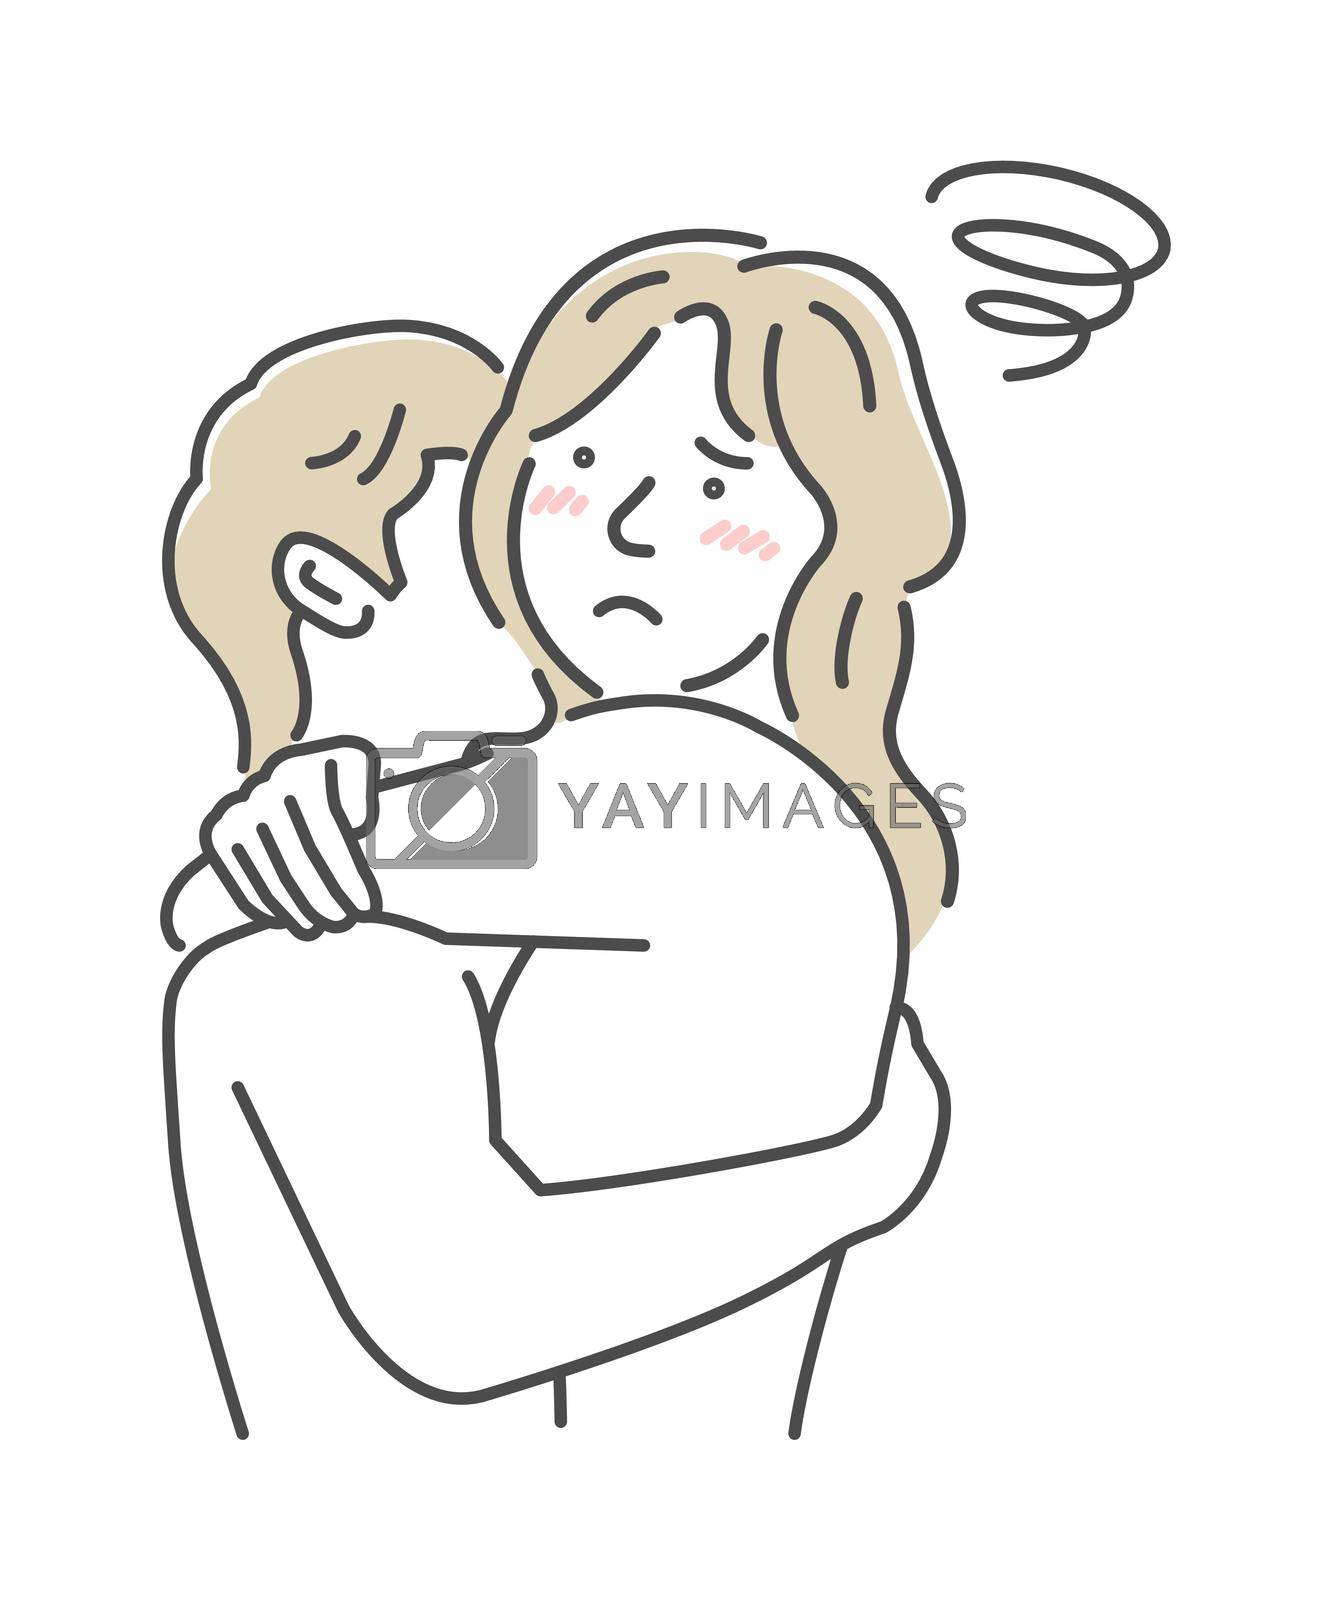 Royalty free image of Embraces loving couple vector illustration | depression, disappointment by barks